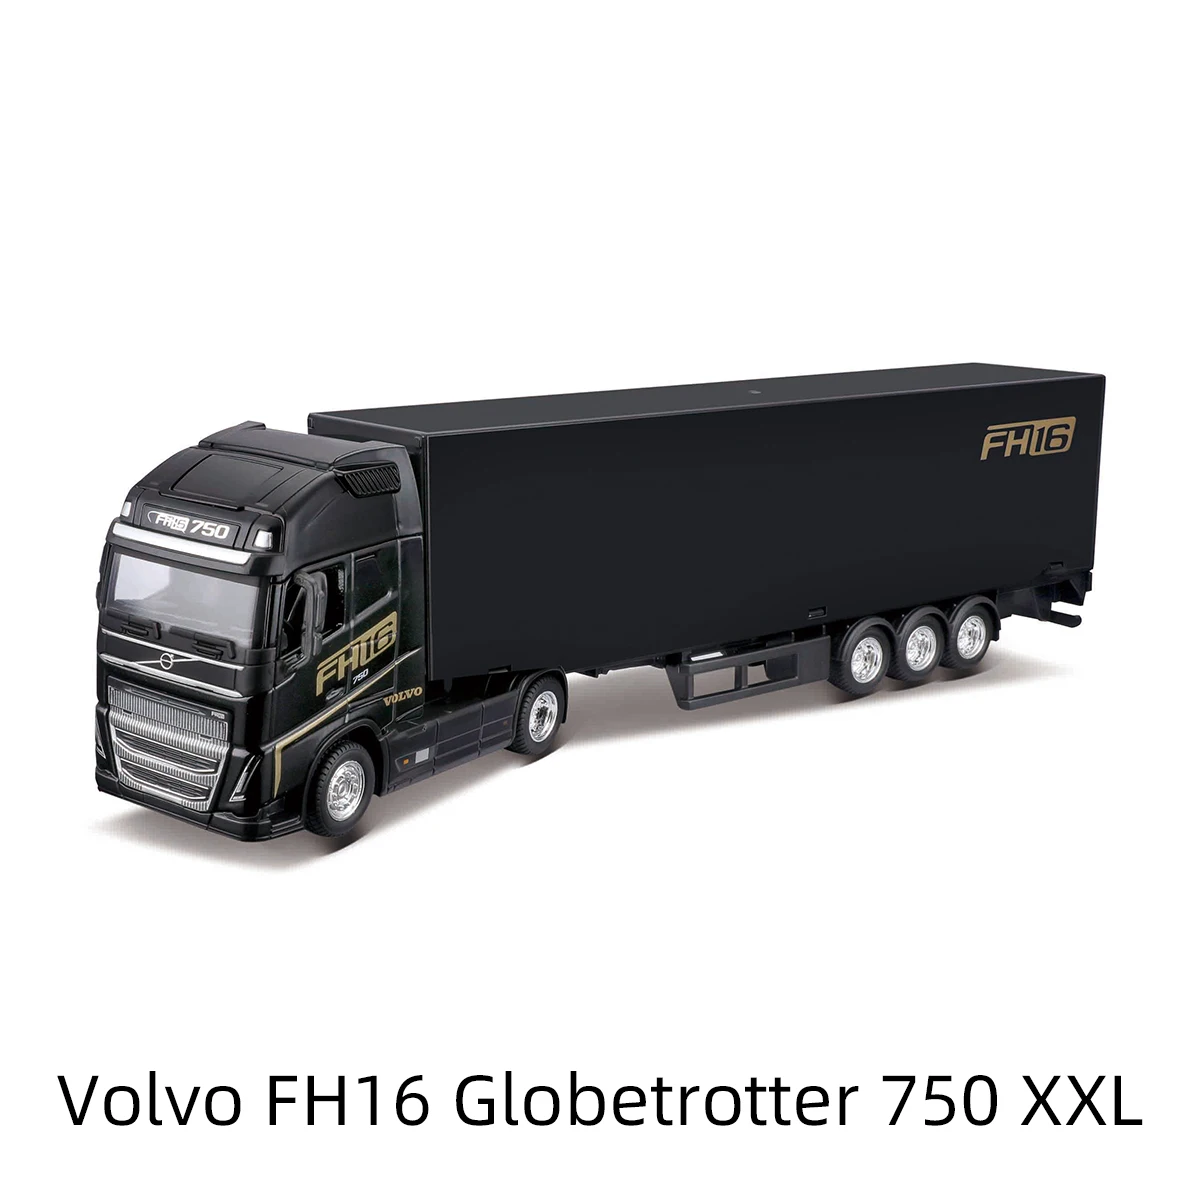 Bburago 1:43 Volvo FH16 Globetrotter 750 XX M-B Actros Trailer Heavy Tractor Truck Black Die Cast Collectible Hobbies Model Toys